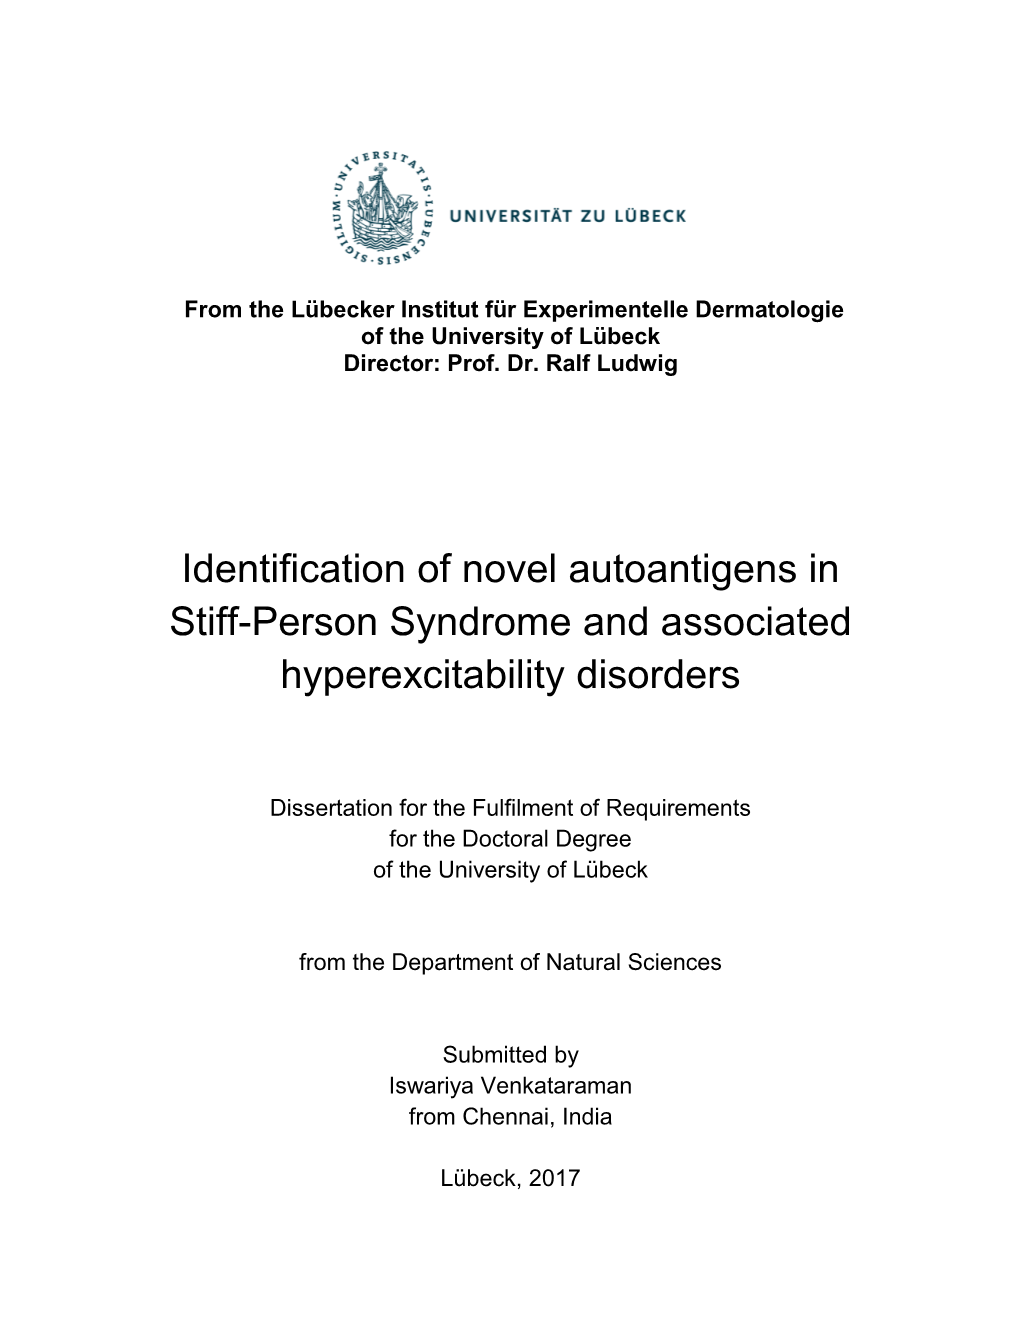 Identification of Novel Autoantigens in Stiff-Person Syndrome and Associated Hyperexcitability Disorders